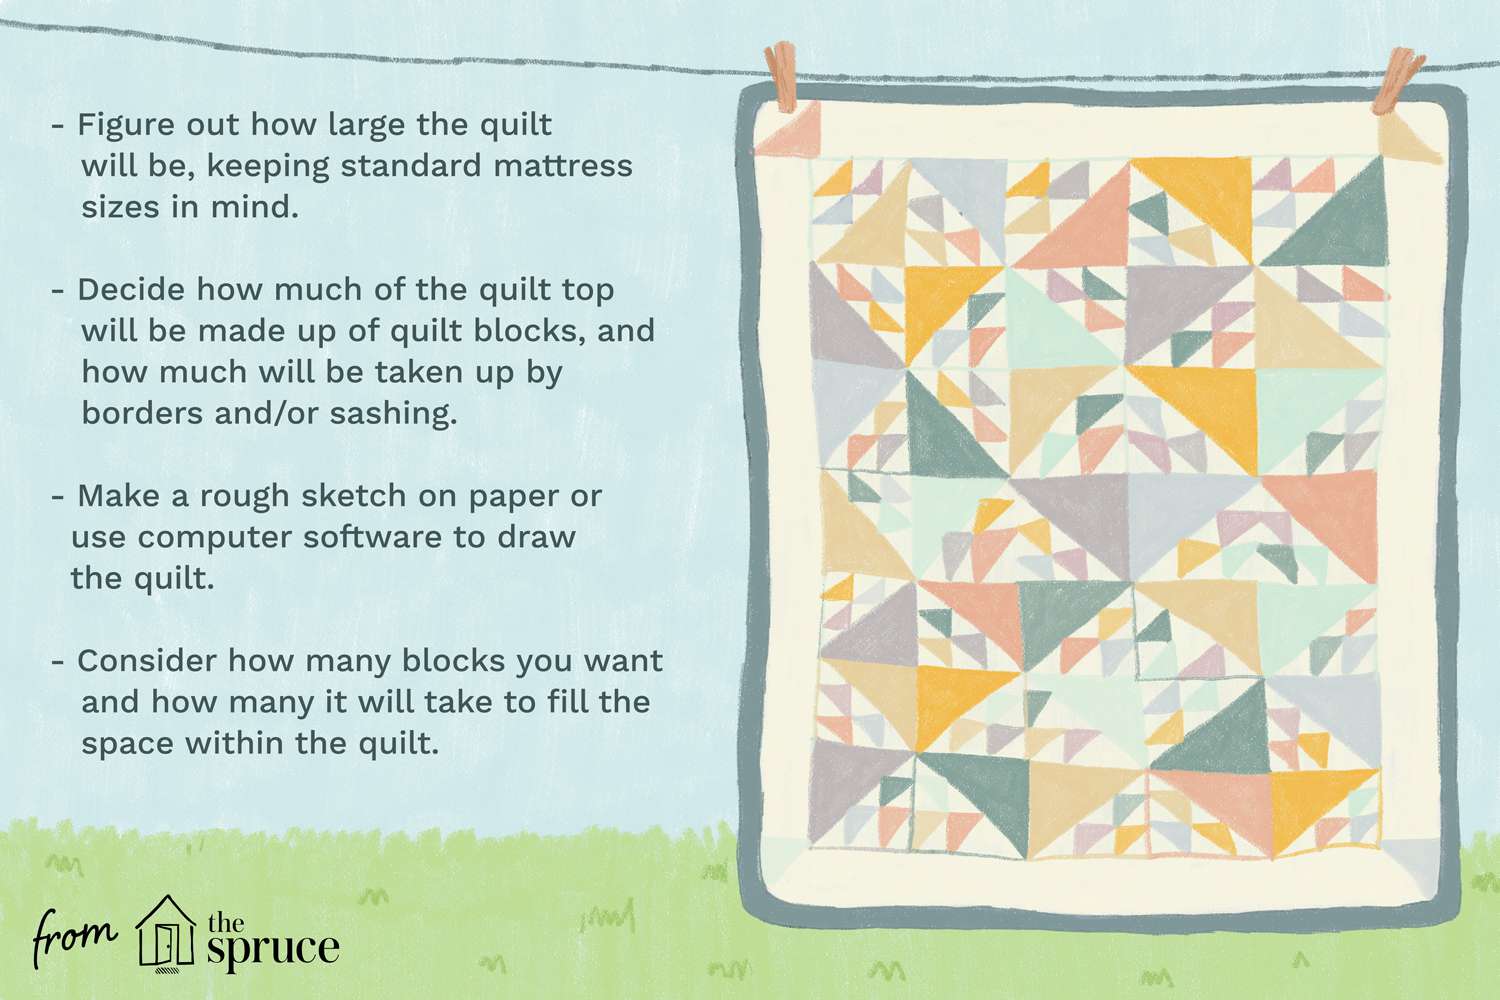 How Much Backing Material Is Needed For A 60 X 60 Quilt?